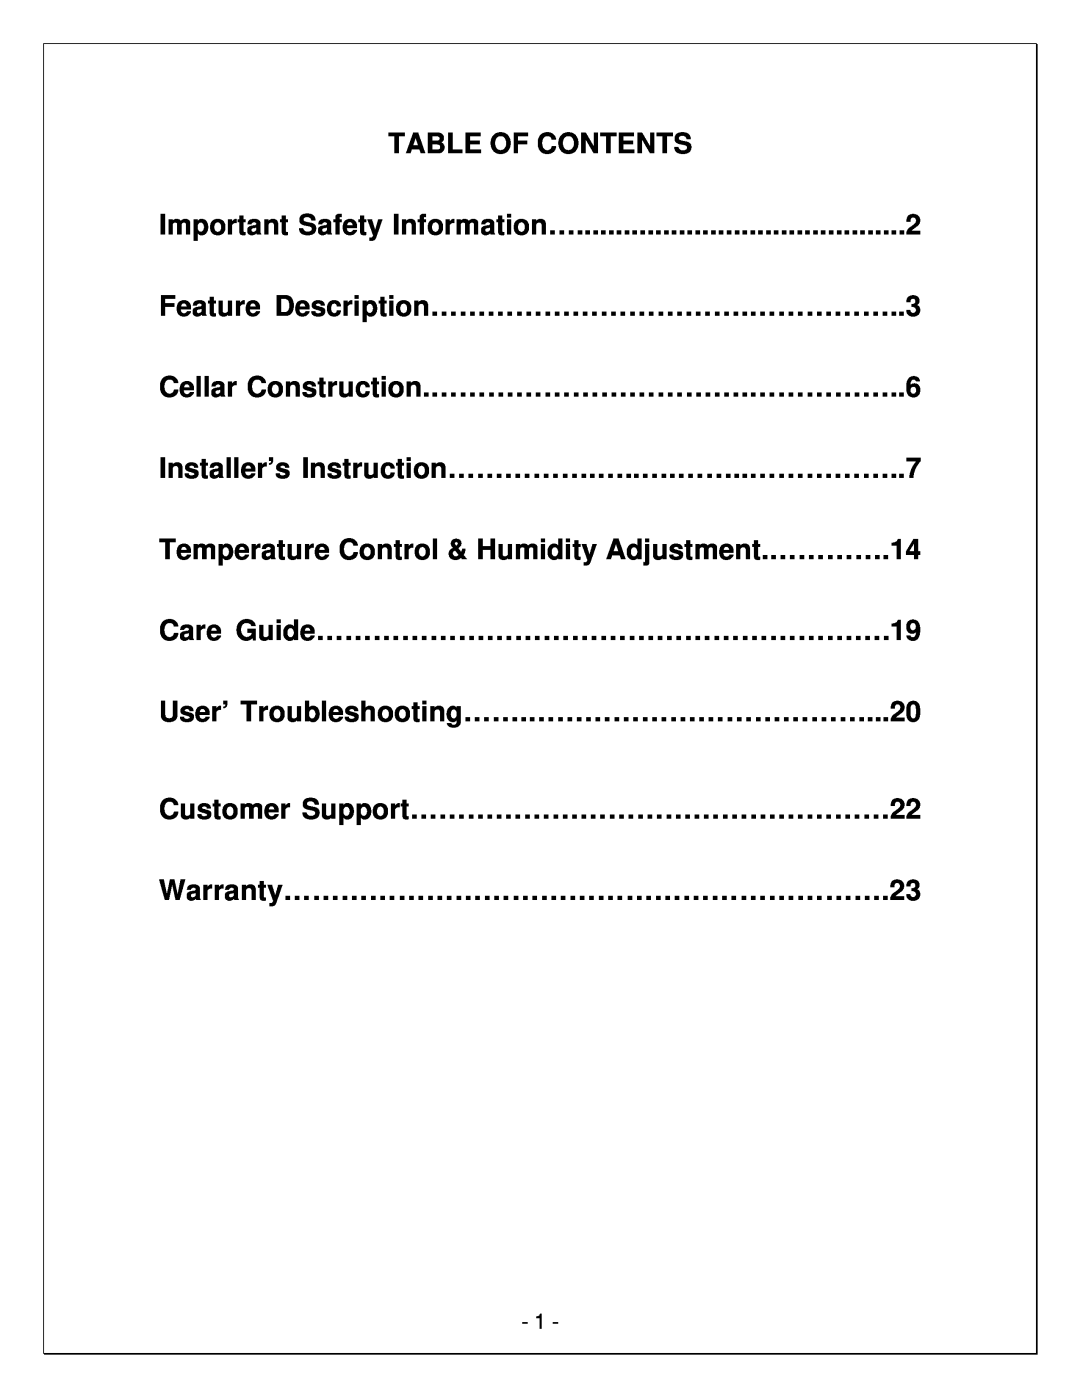 Vinotemp VINO2500-2500SSR, VINO2500-4500SSR, VINO2500-6500SSR manual Table Of Contents 